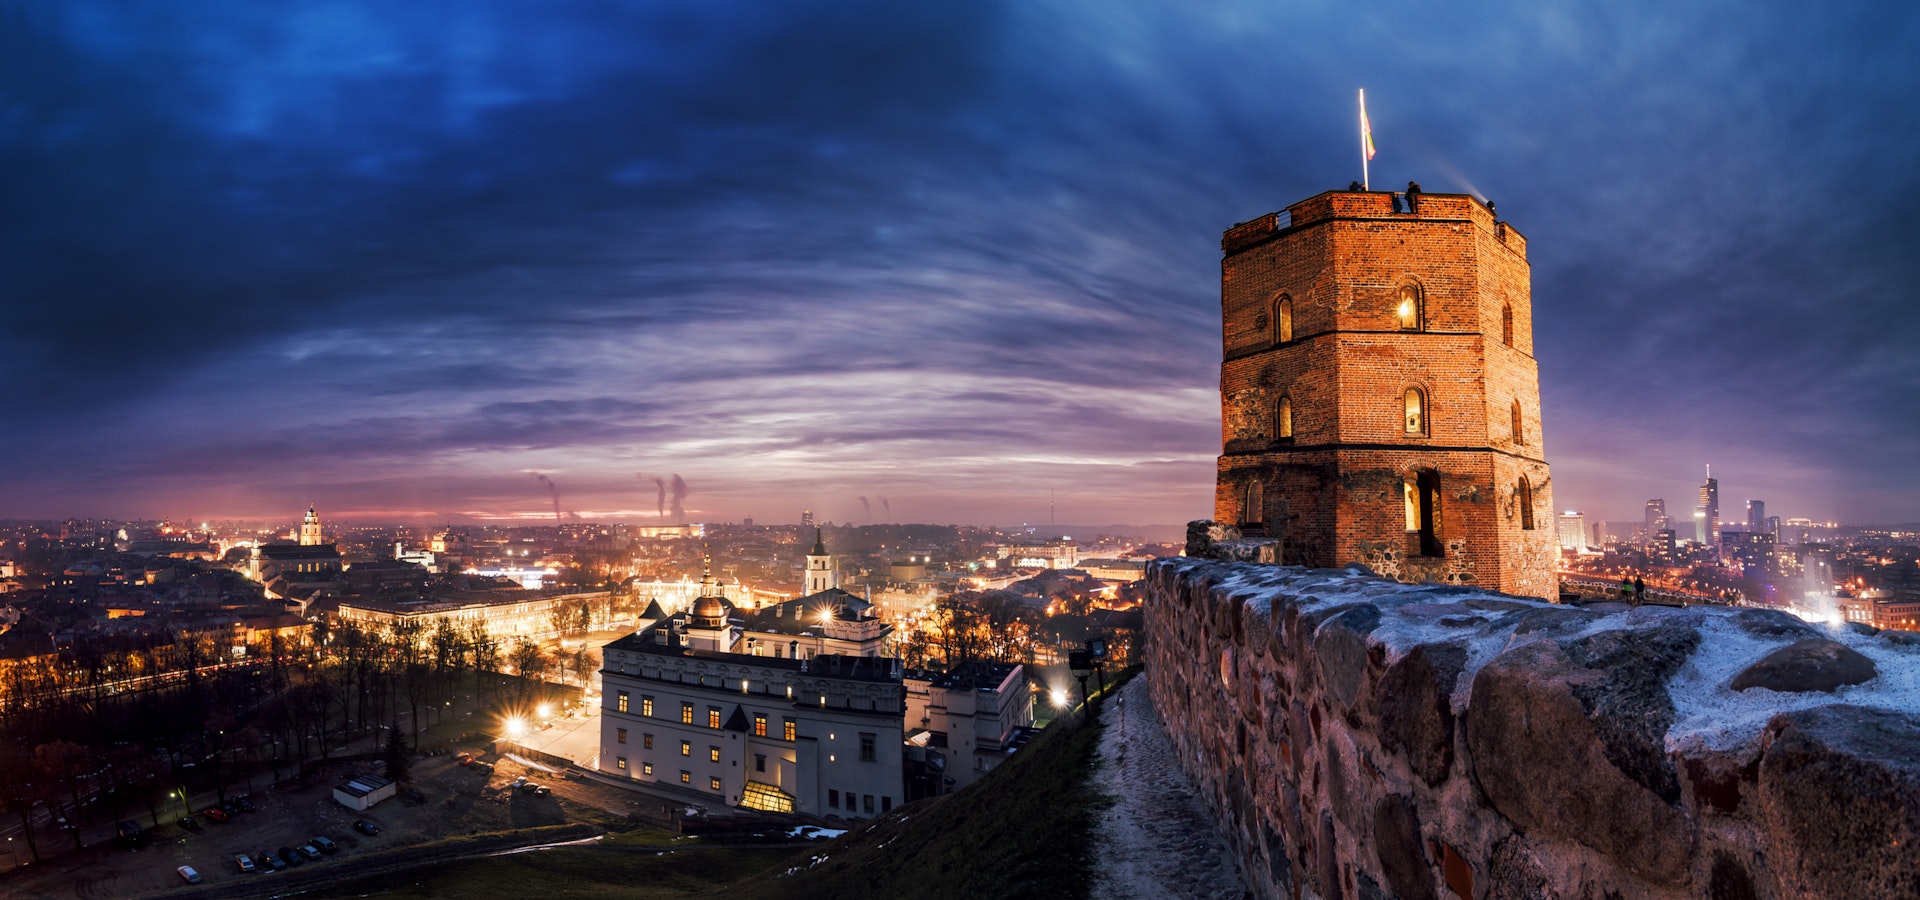 A tower in Vilnius at night